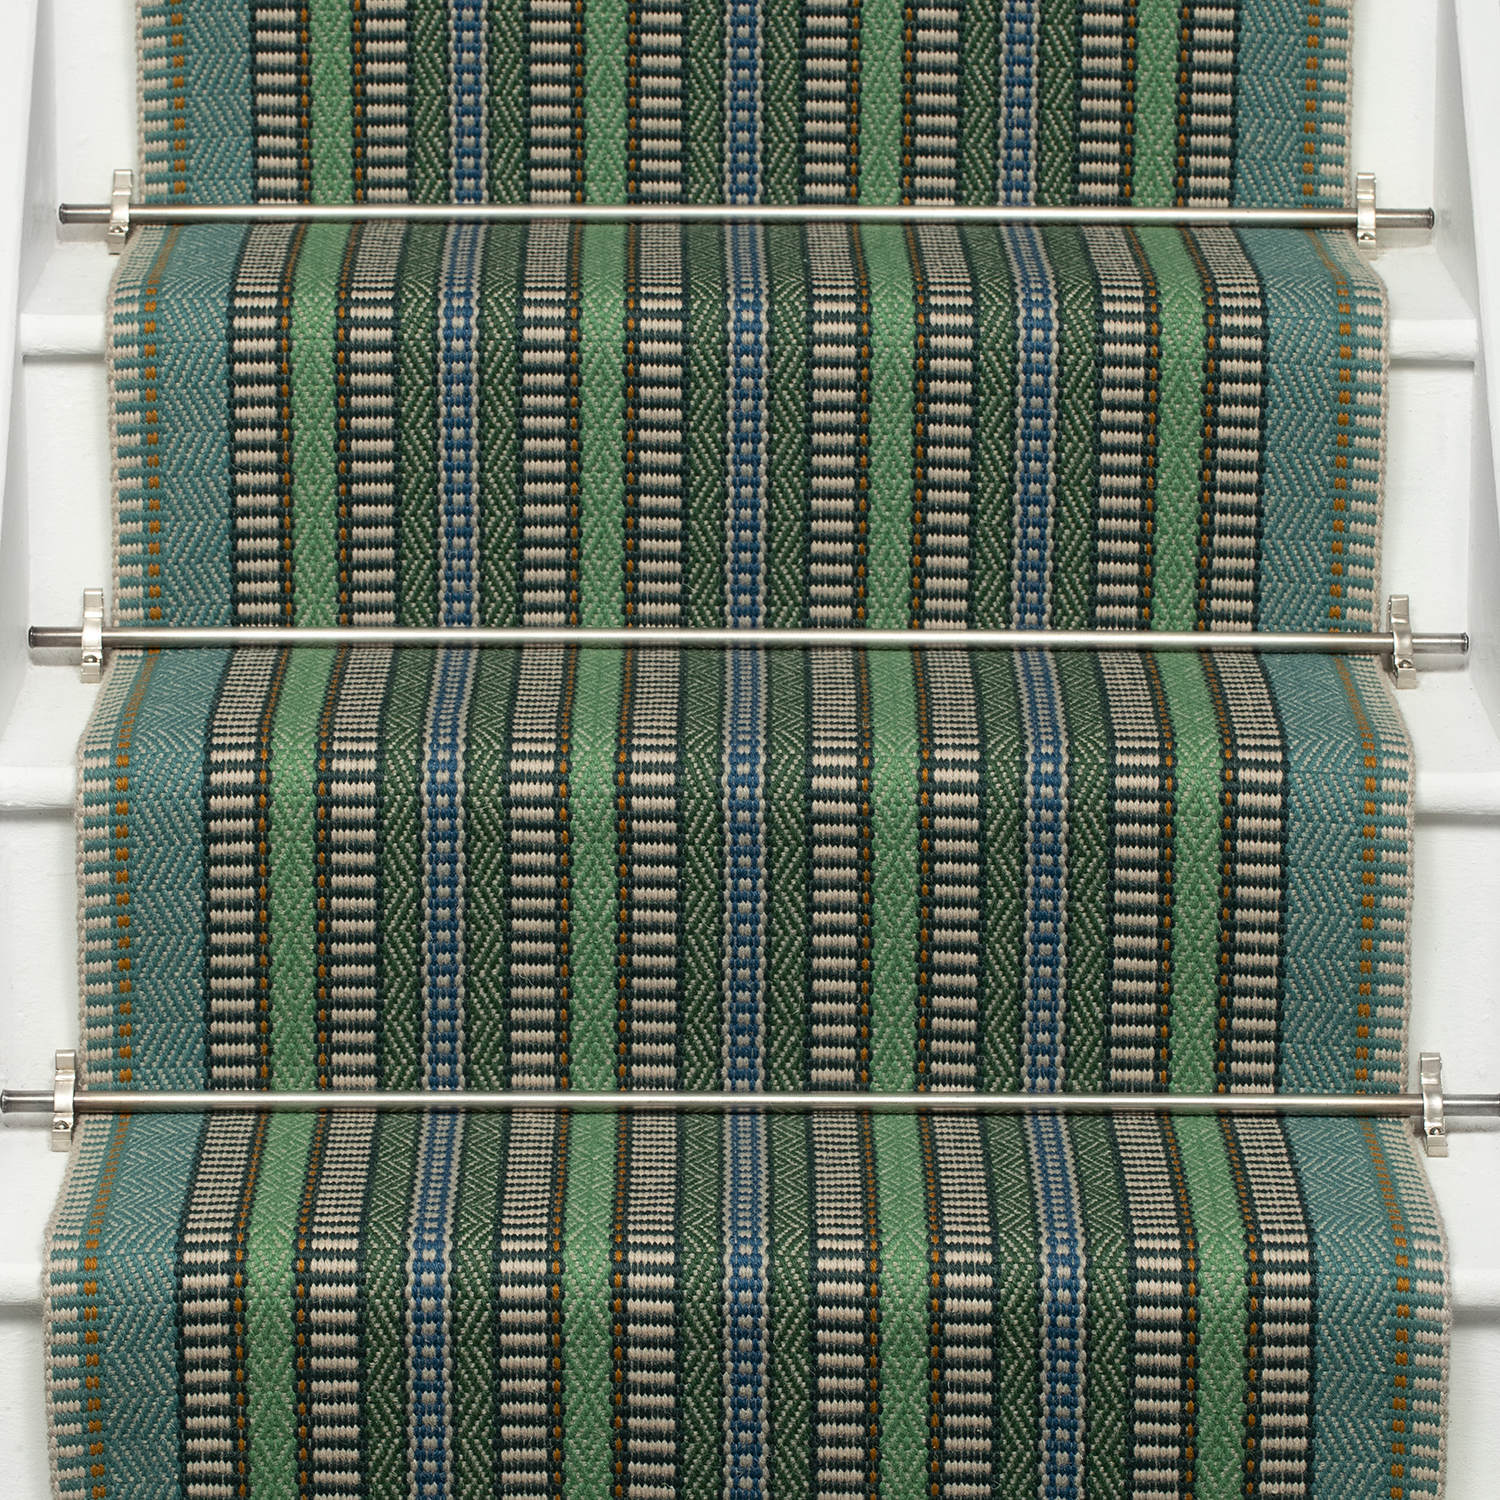 Morella Emerald stair runner by Roger Oates